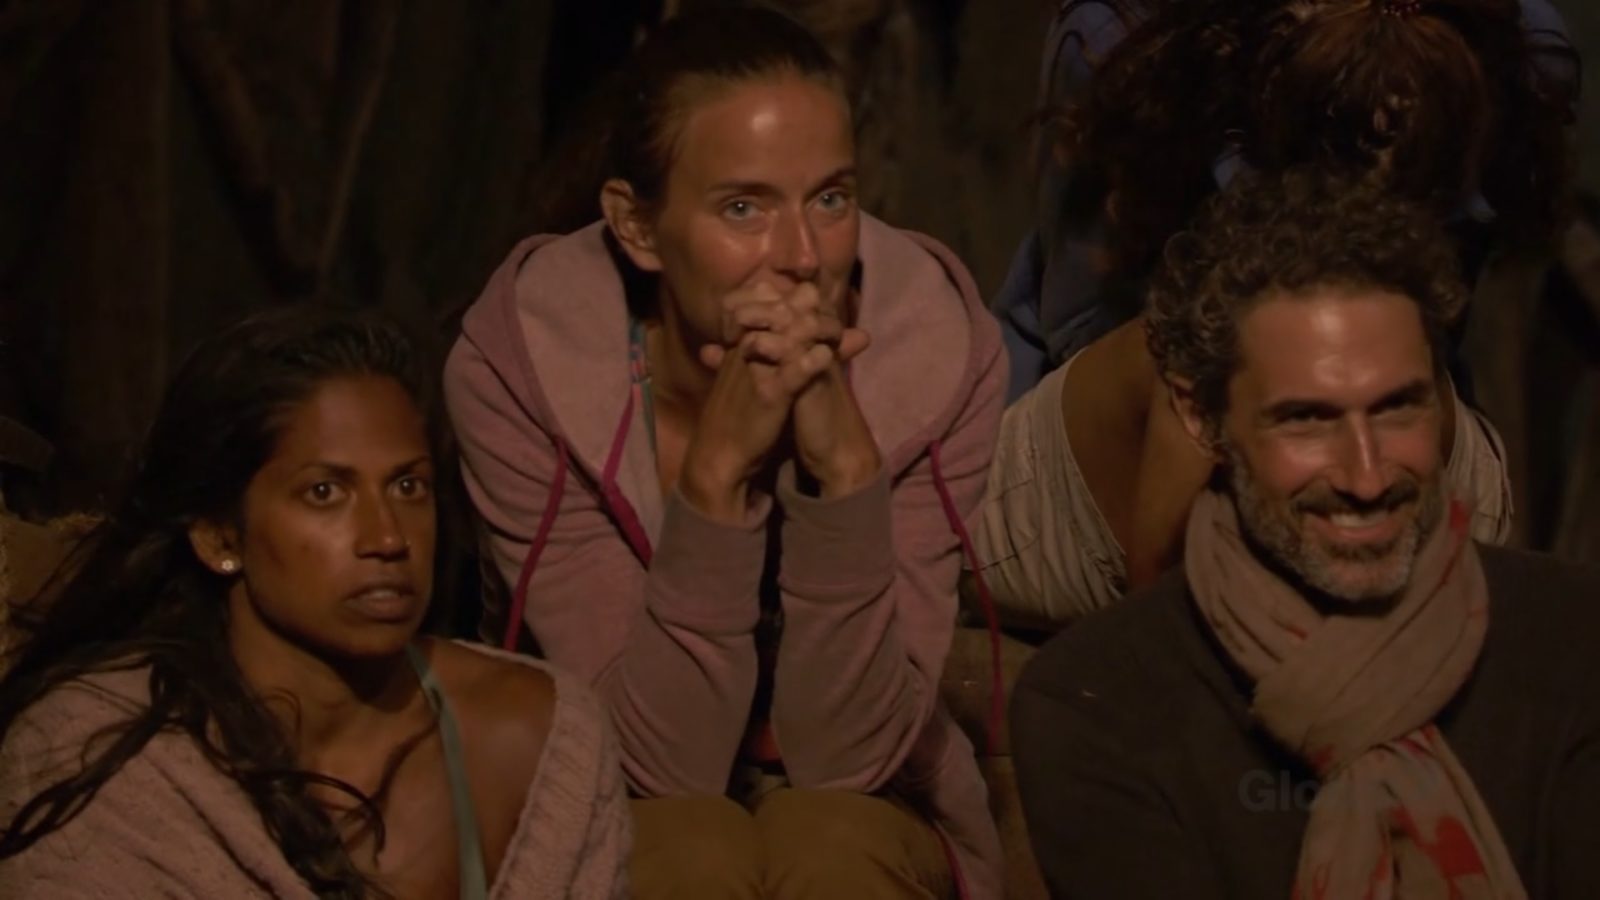 Natalie, Amber, and Ethan watch the Tribal Council chaos on Survivor: Winners at War